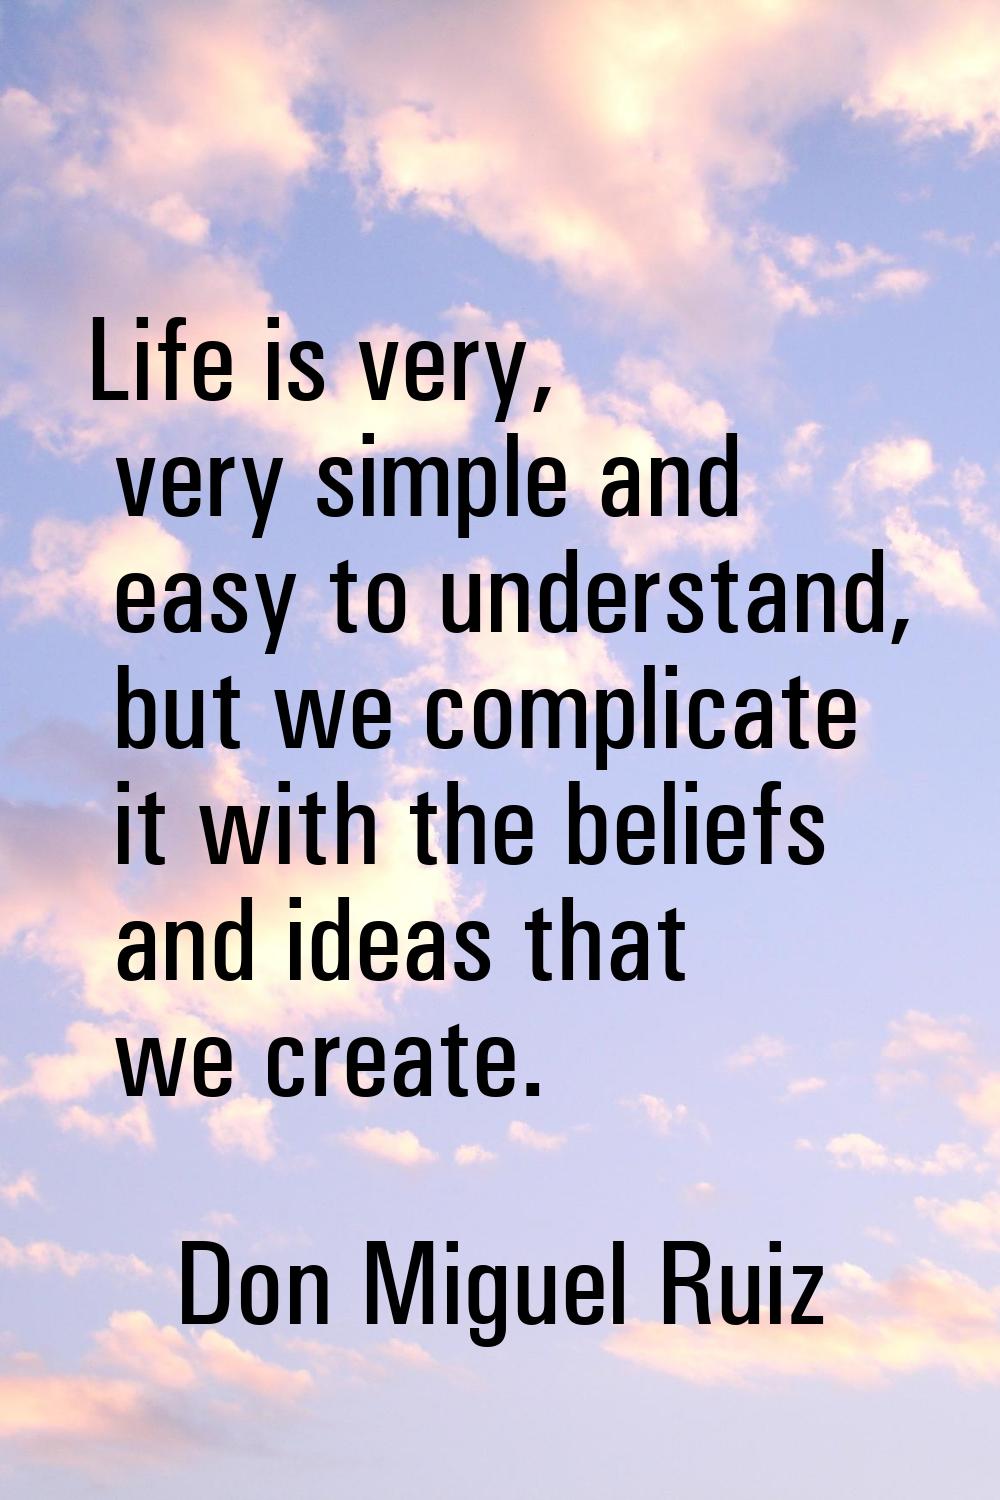 Life is very, very simple and easy to understand, but we complicate it with the beliefs and ideas t